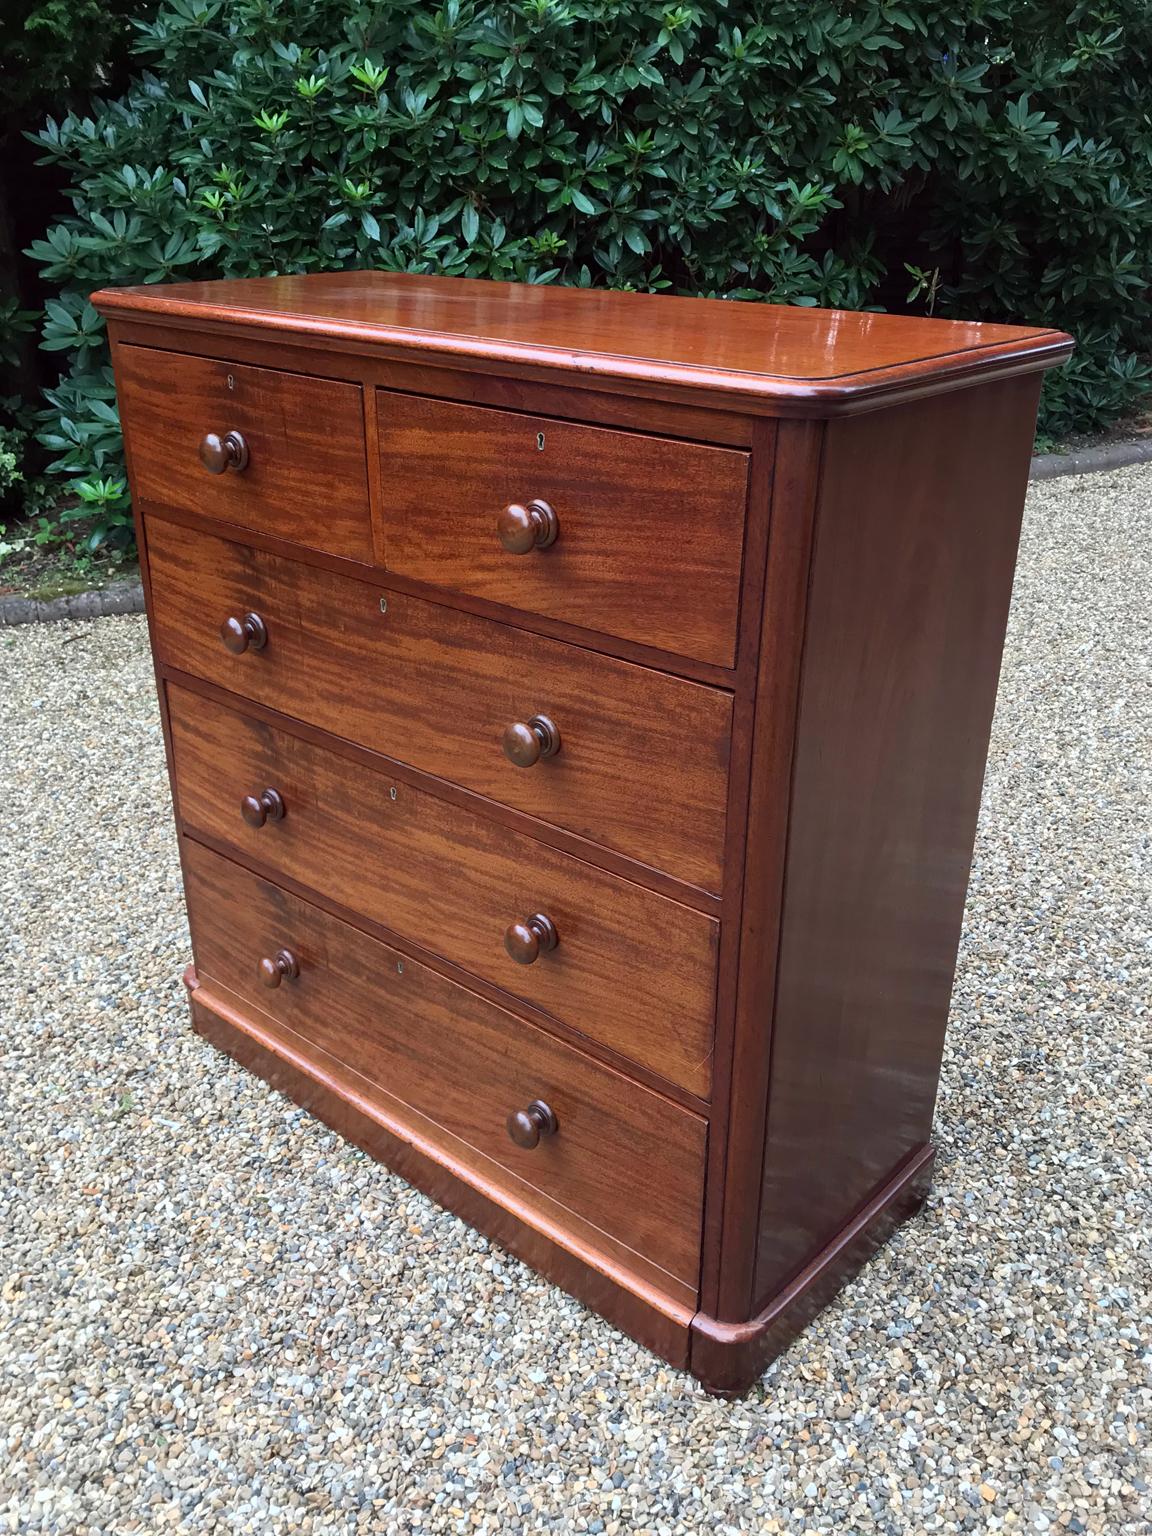 19th century Victorian mahogany chest of drawers with two short, three long solid mahogany drawers and original bun handles,

circa 1870

Dimensions:
Height 46.5 inches – 118 cms
Width 45.5 inches – 116 cms
Depth 19 inches – 49 cms.



 